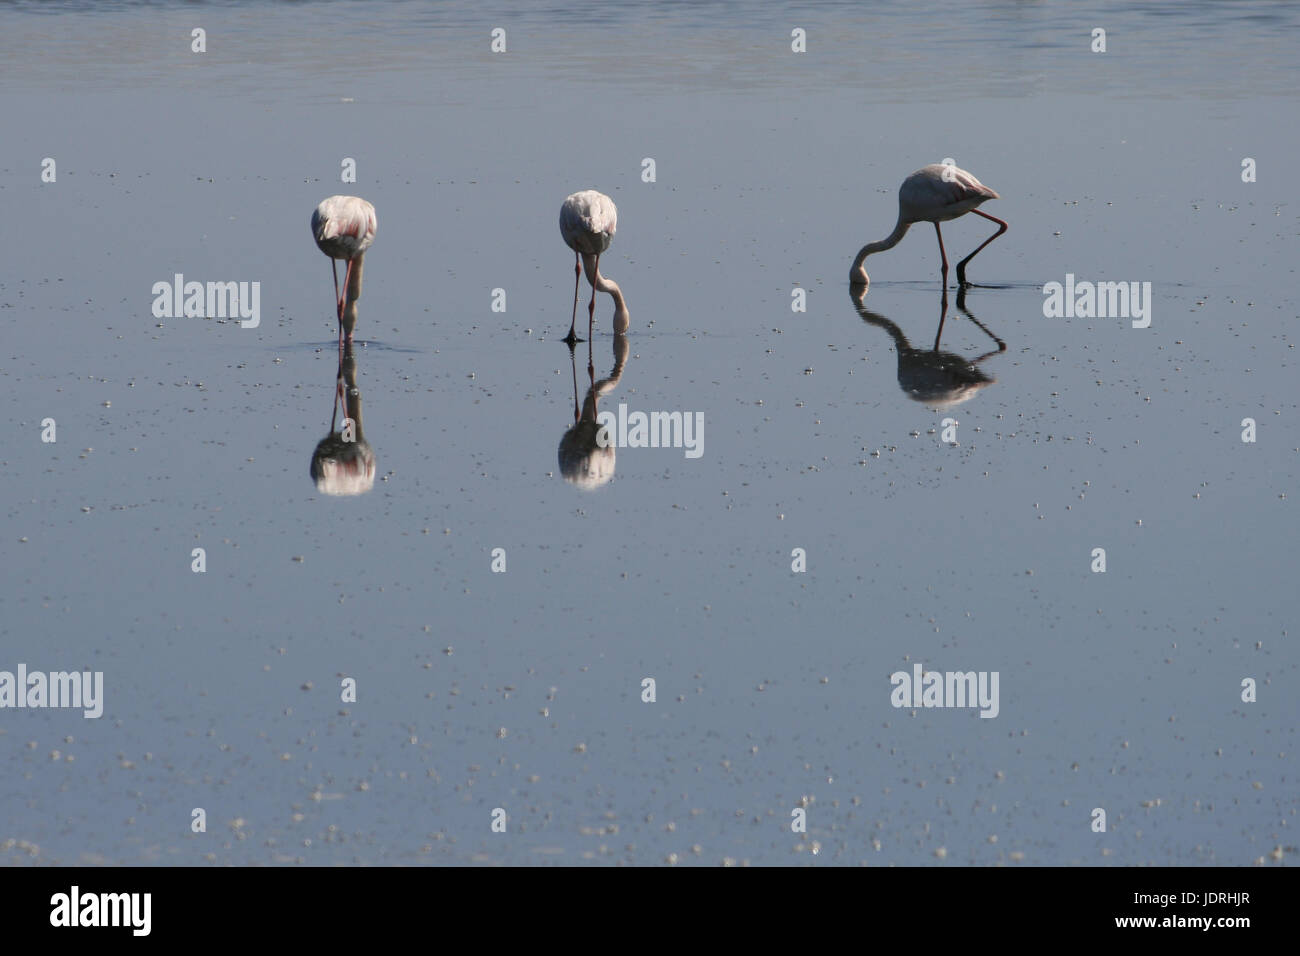 Three pink flamingoes (phoenicopterus) wading in the sea at Walvis Bay, Namibia, Africa. Stock Photo